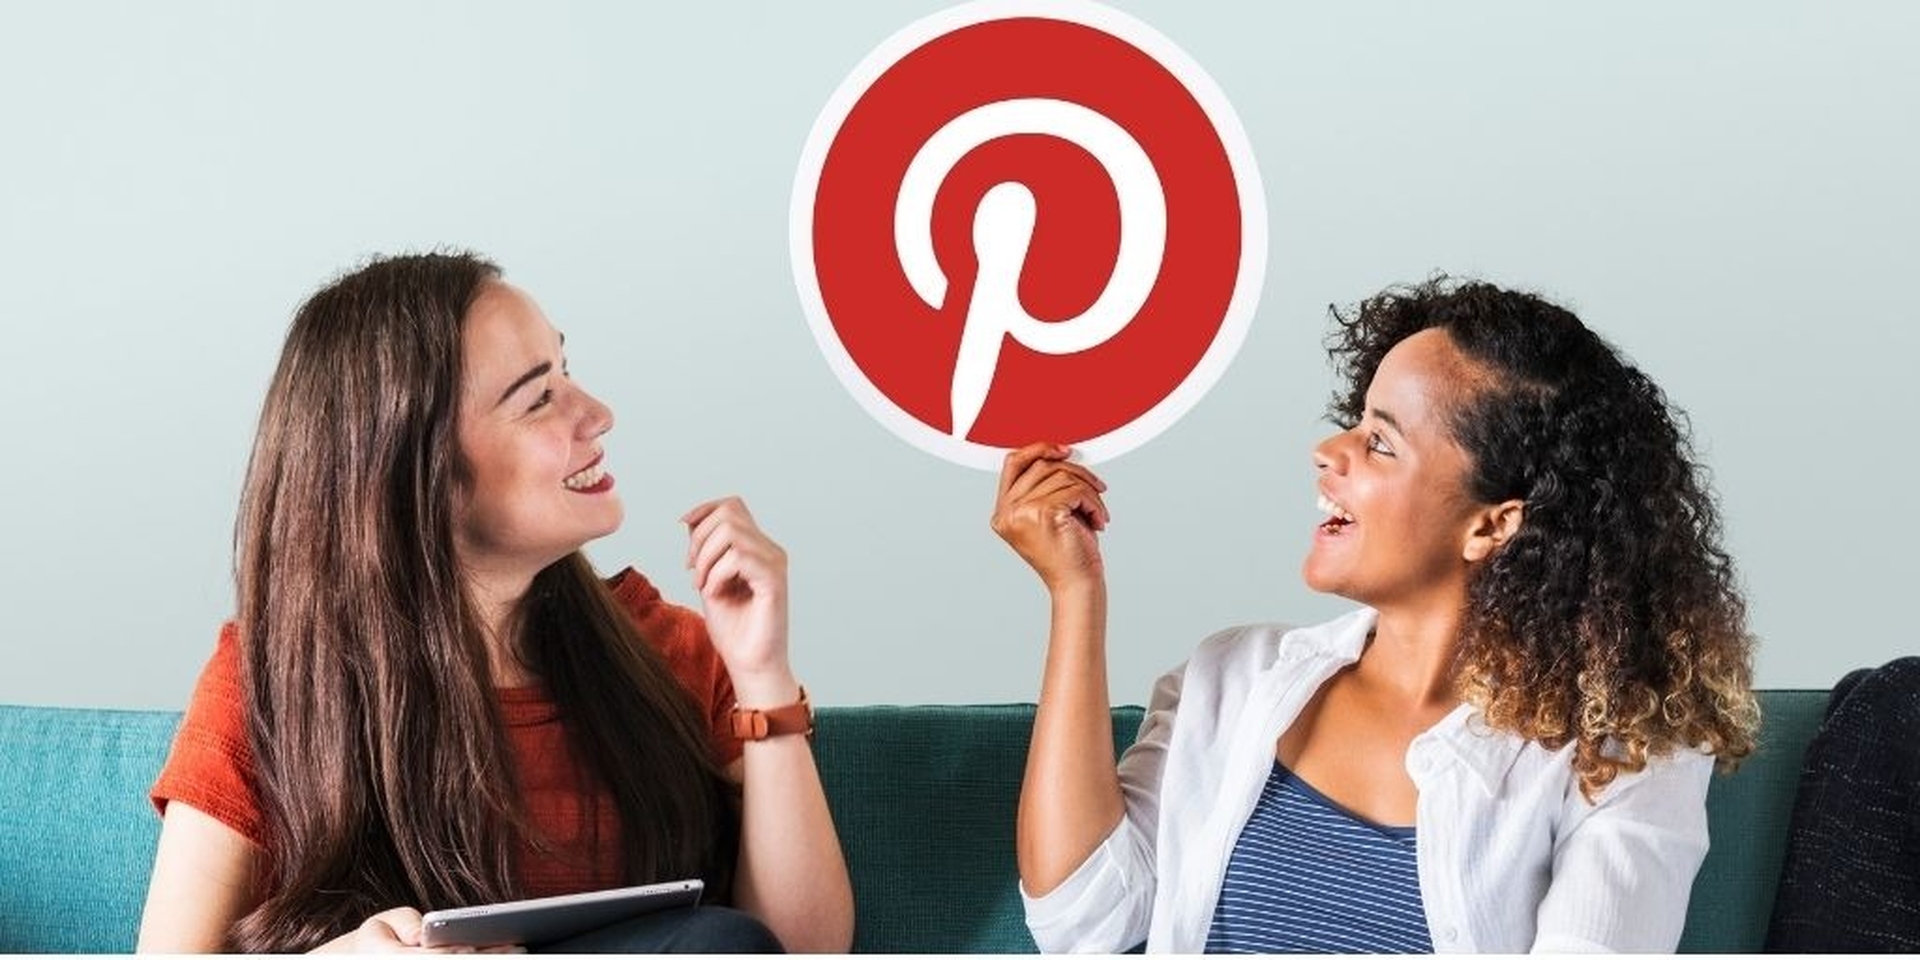 In this article, we are going to cover how to rank on Pinterest in 2022, so your pins can get more attraction and you may grow your presence on the platform.